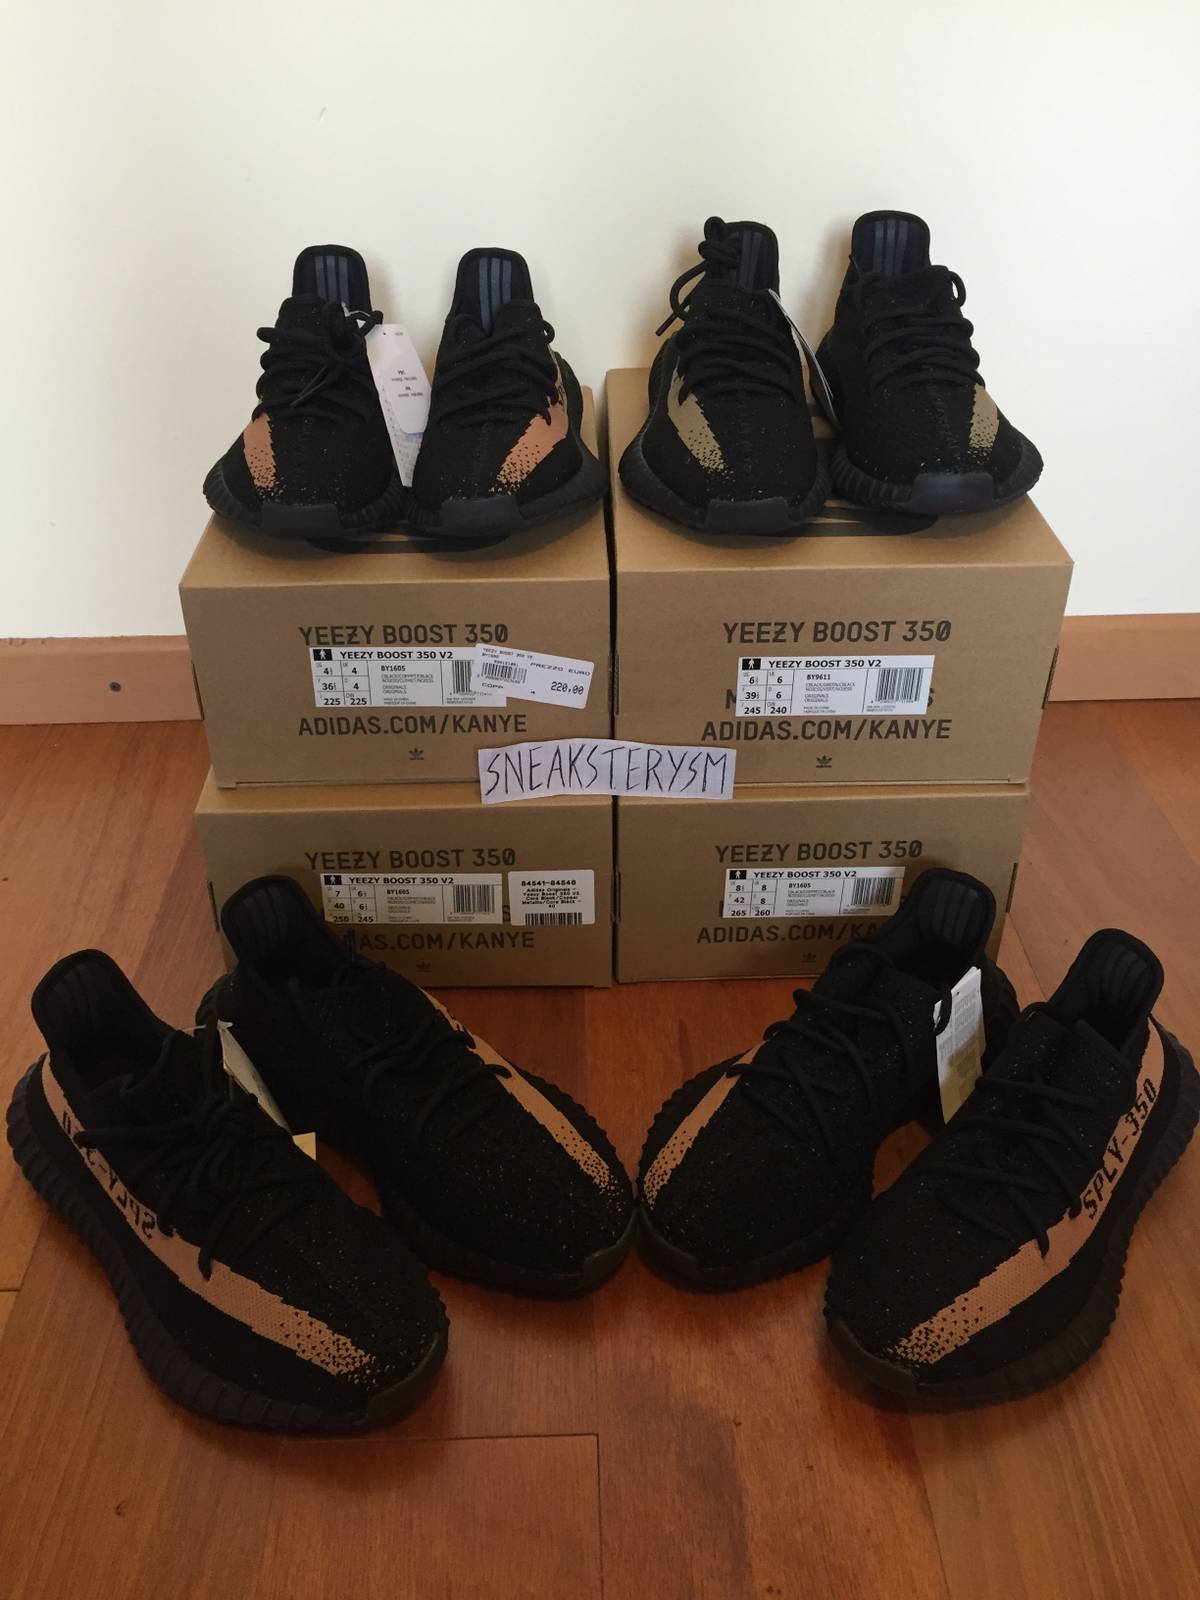 High Tops Adidas yeezy boost 350 V 2 'black red' infant images canada